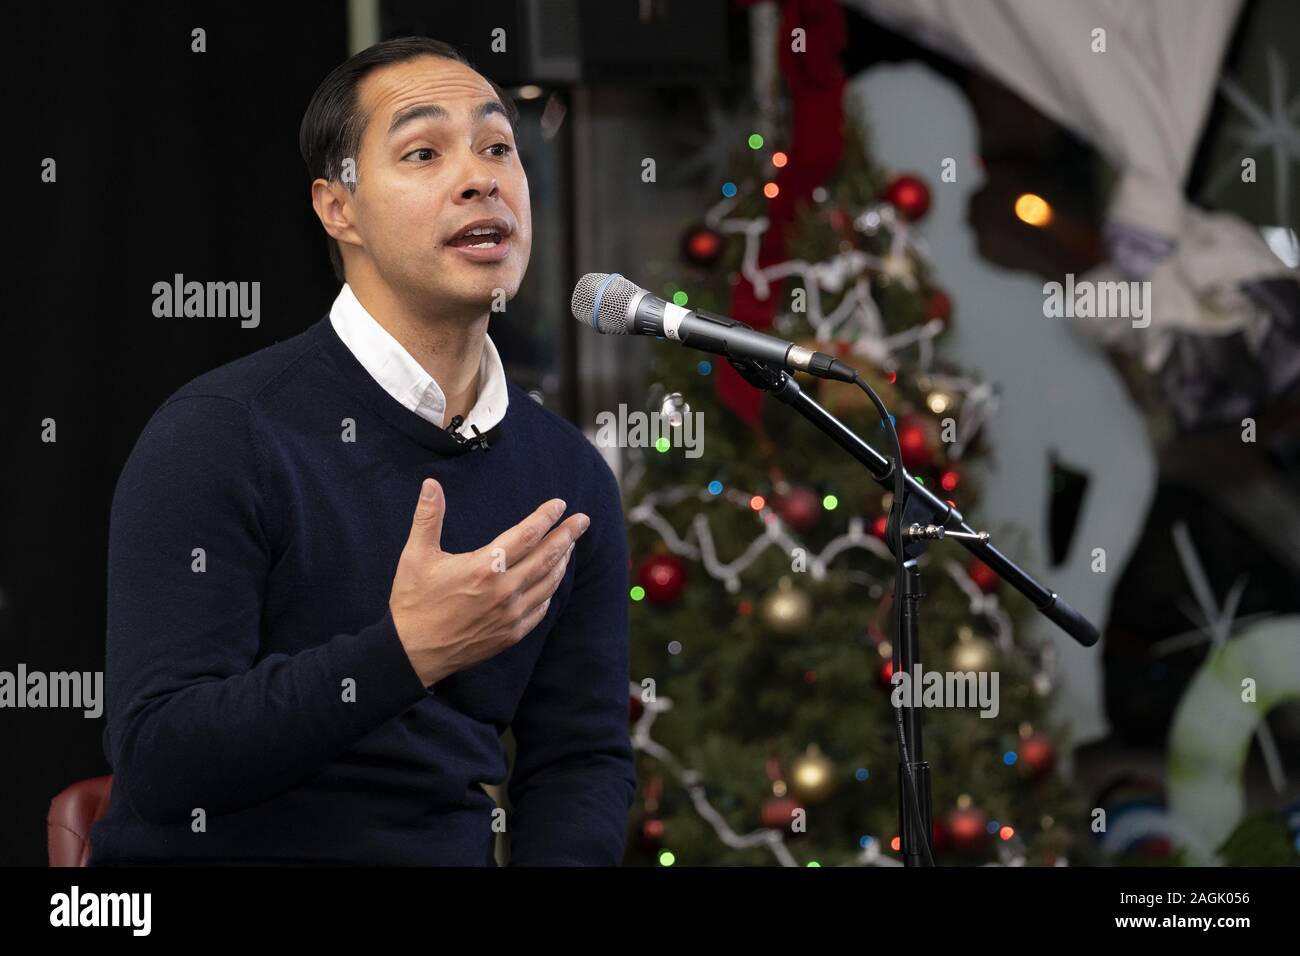 Pasadena, USA. 15th Mar, 2019. Democratic presidential candidate, Julian Castro, speaks at the town hall on workers solidarity and migrant justice in Pasadena, California. Castro met with his community members at the Job Center ahead of the Democratic Party Debate to be held at Loyola Marymount University. Credit: Ronen Tivony/SOPA Images/ZUMA Wire/Alamy Live News Stock Photo